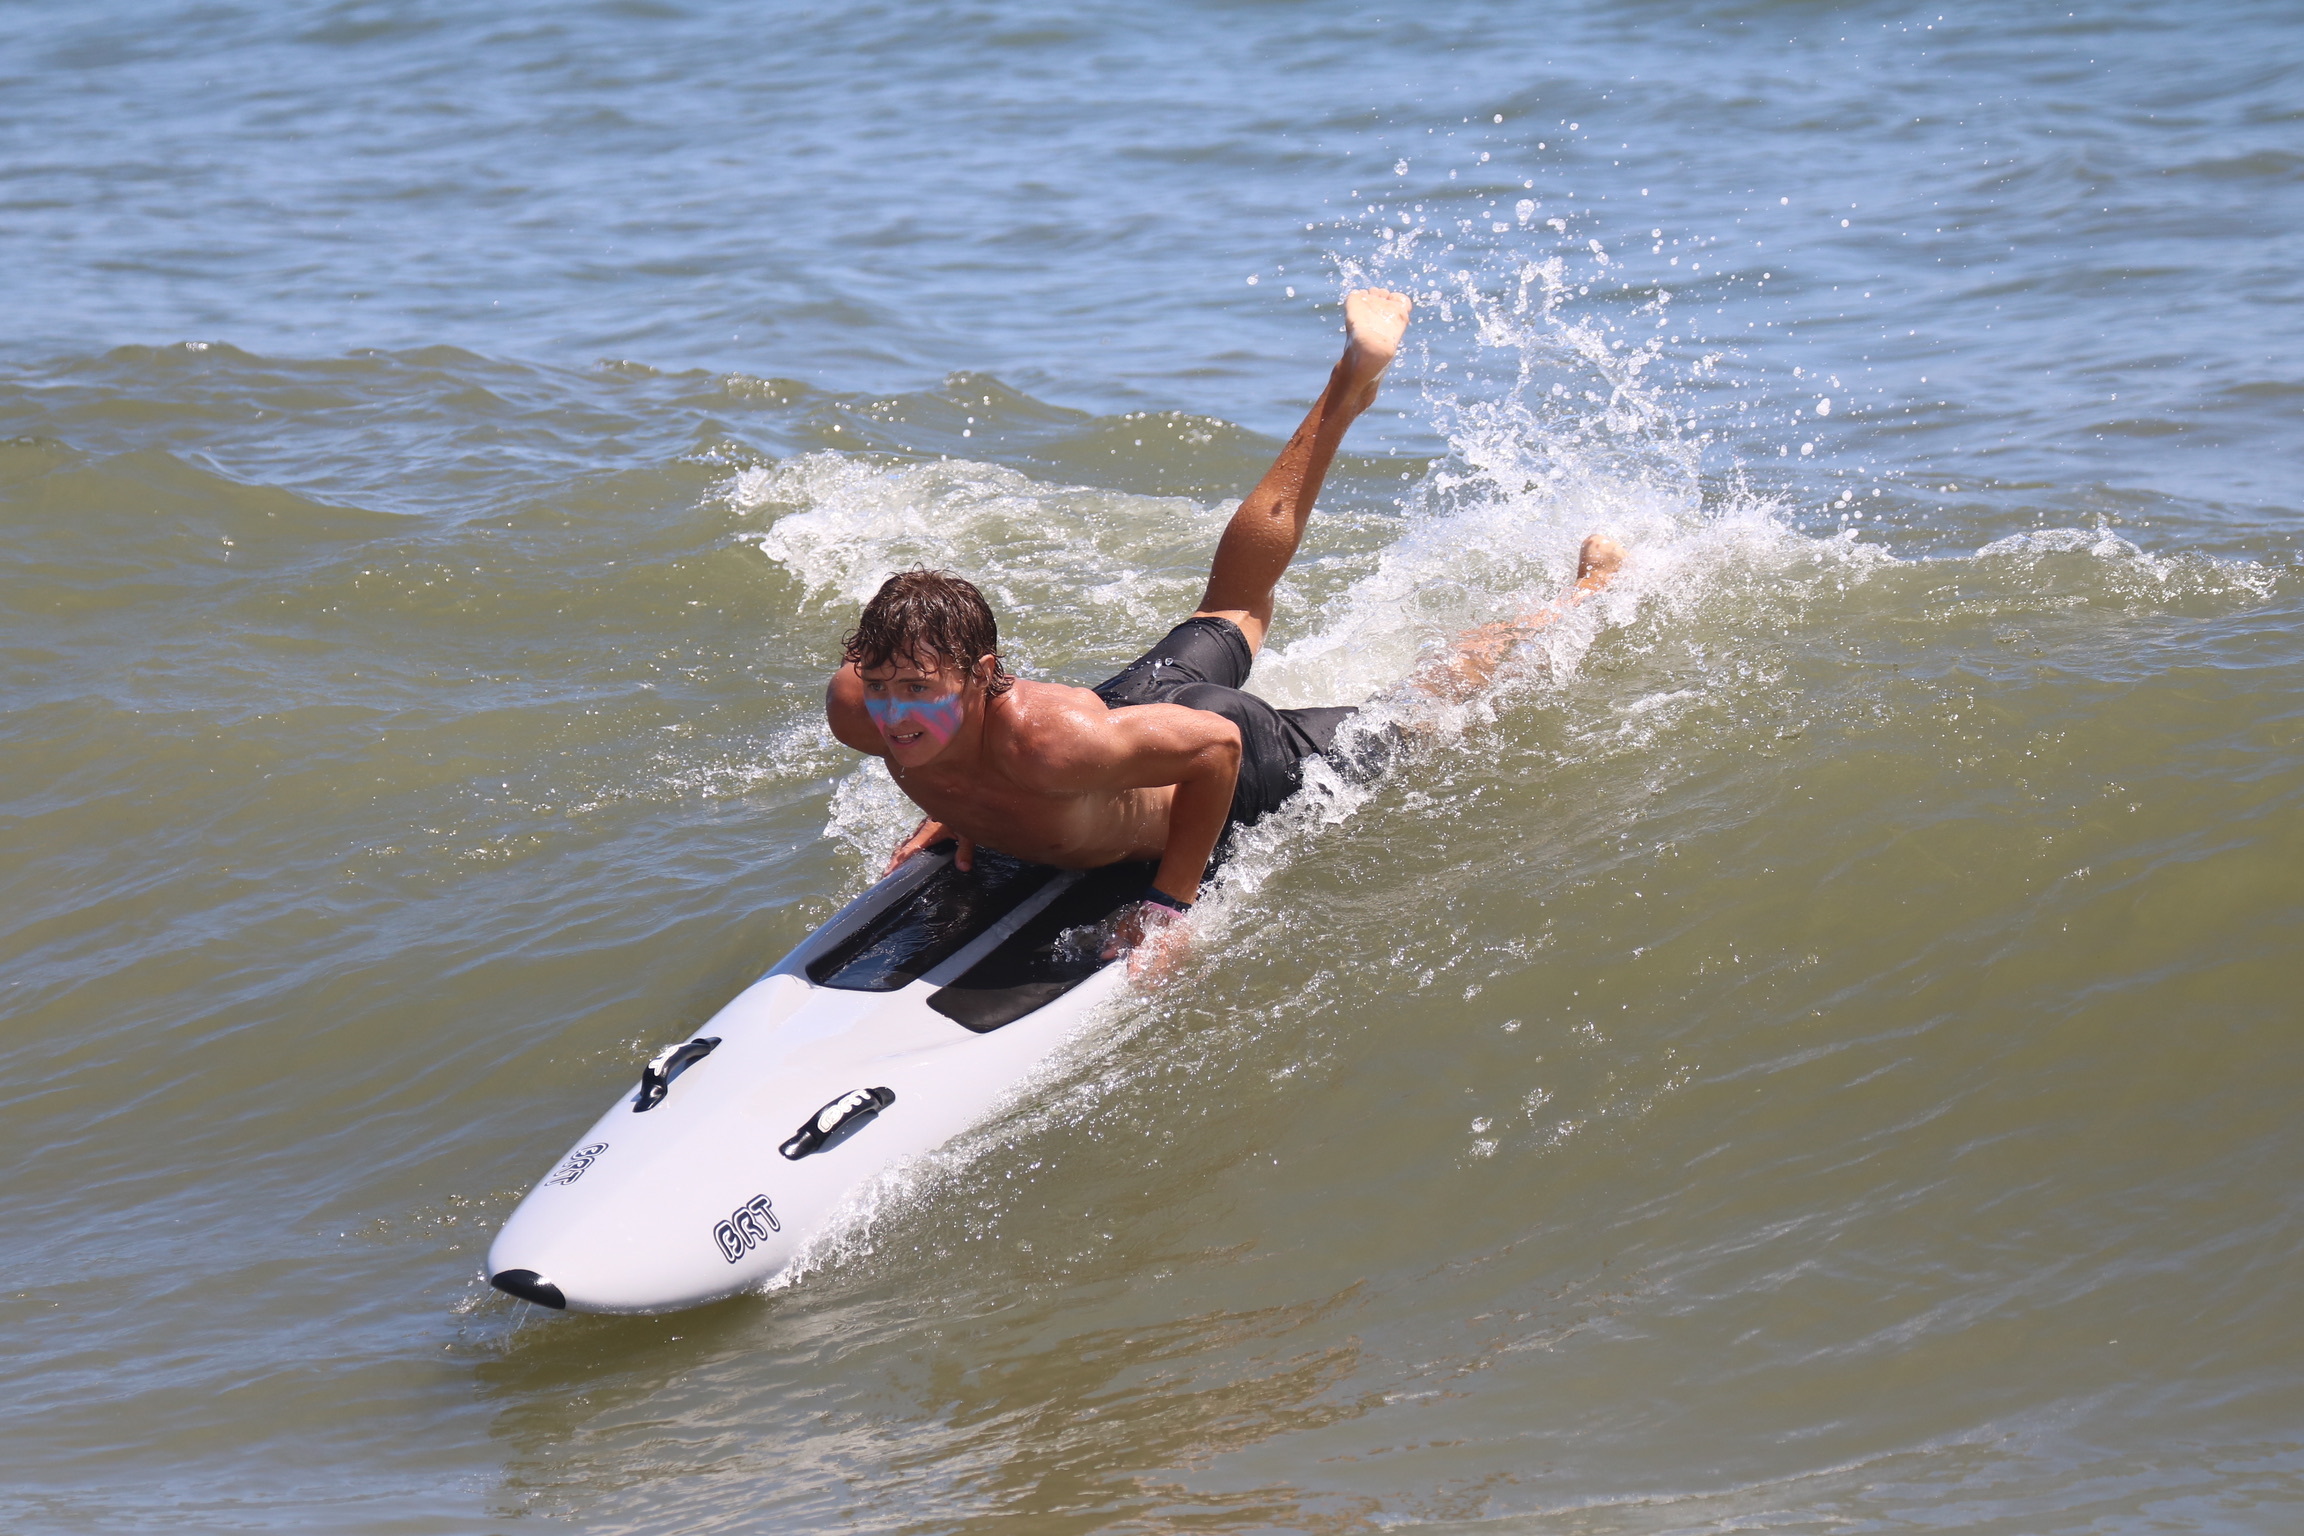 Junior lifeguard Luke Castillo won several events over the weekend, including on a paddleboard. CINTIA PARSONS